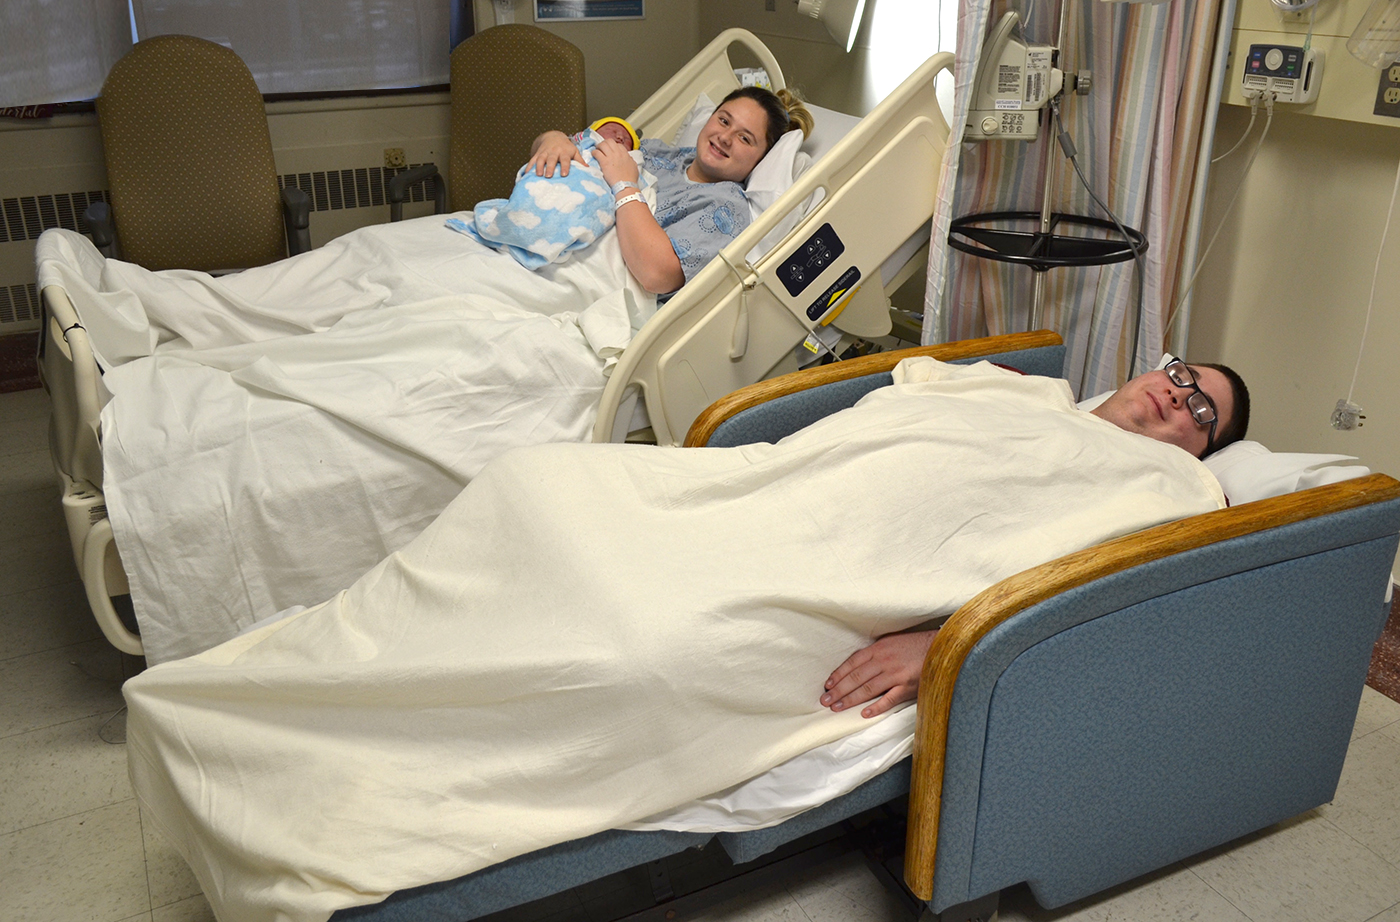 Local effort to provide beds for caregivers